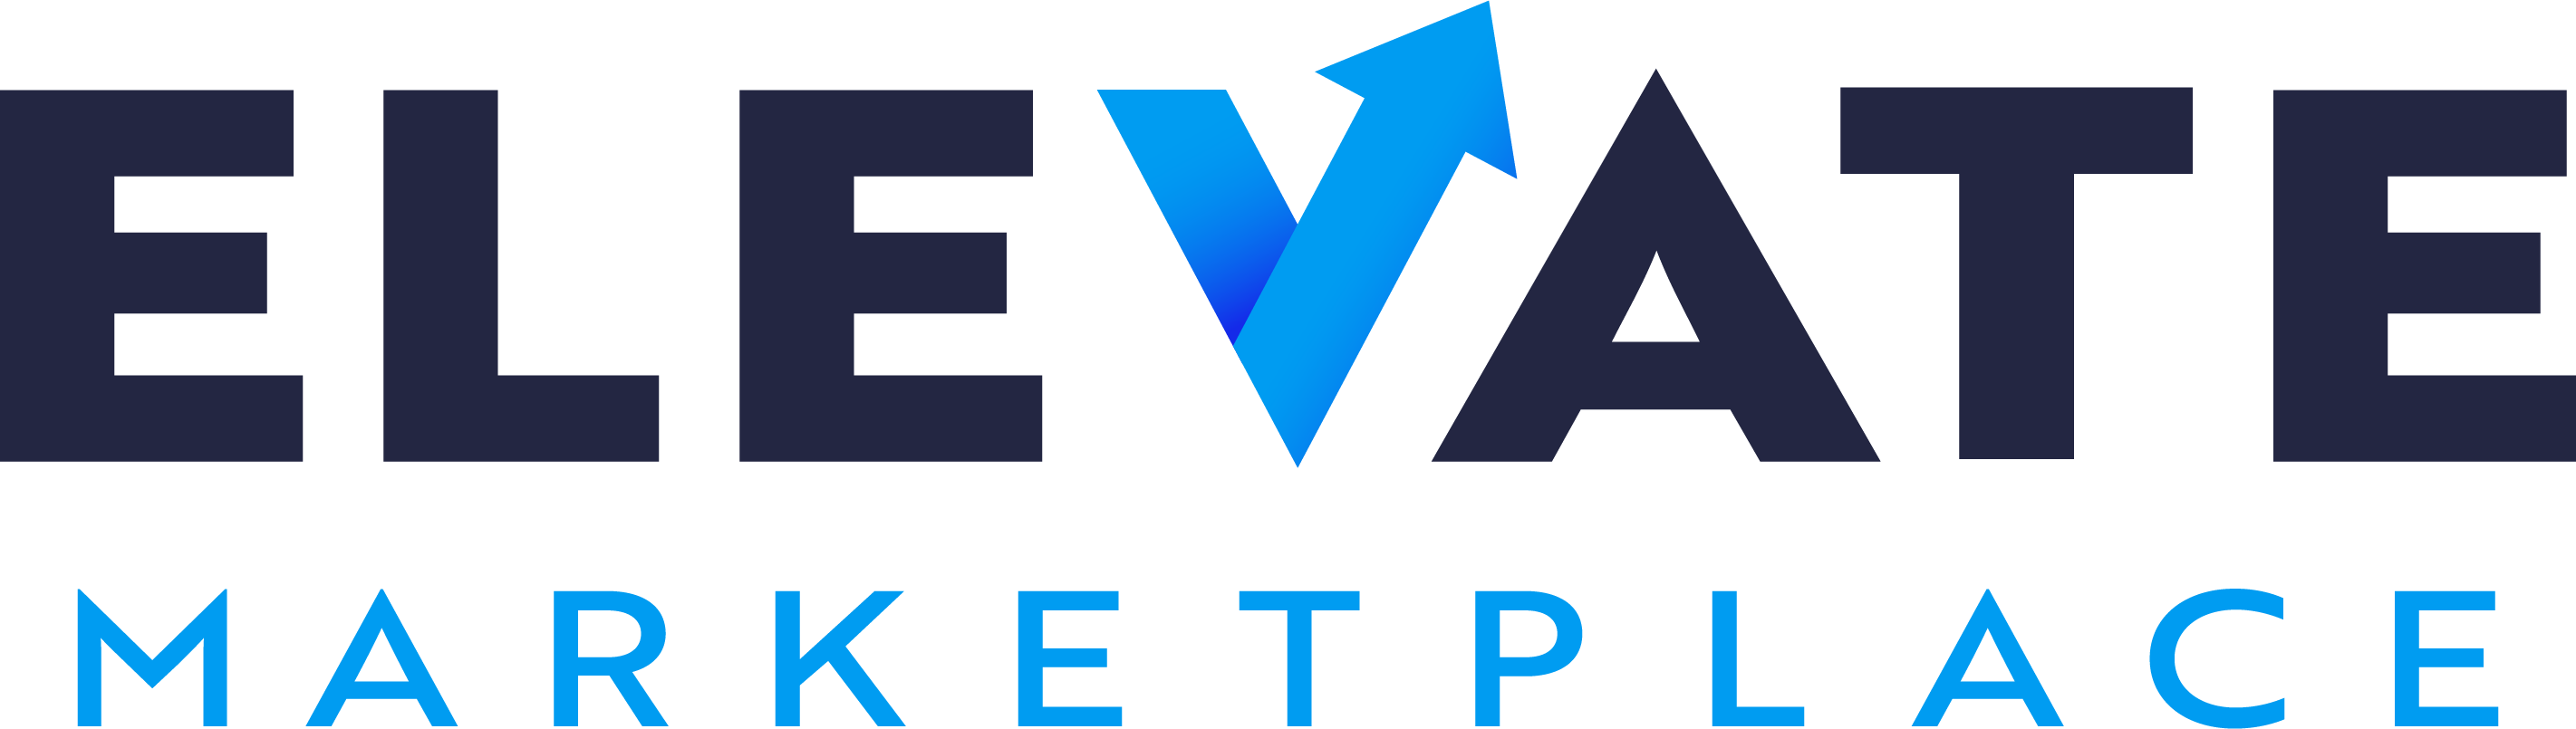 https://www.elevatemarketplace.com/Themes/ELEVATE/Content/images/footer-logo.png